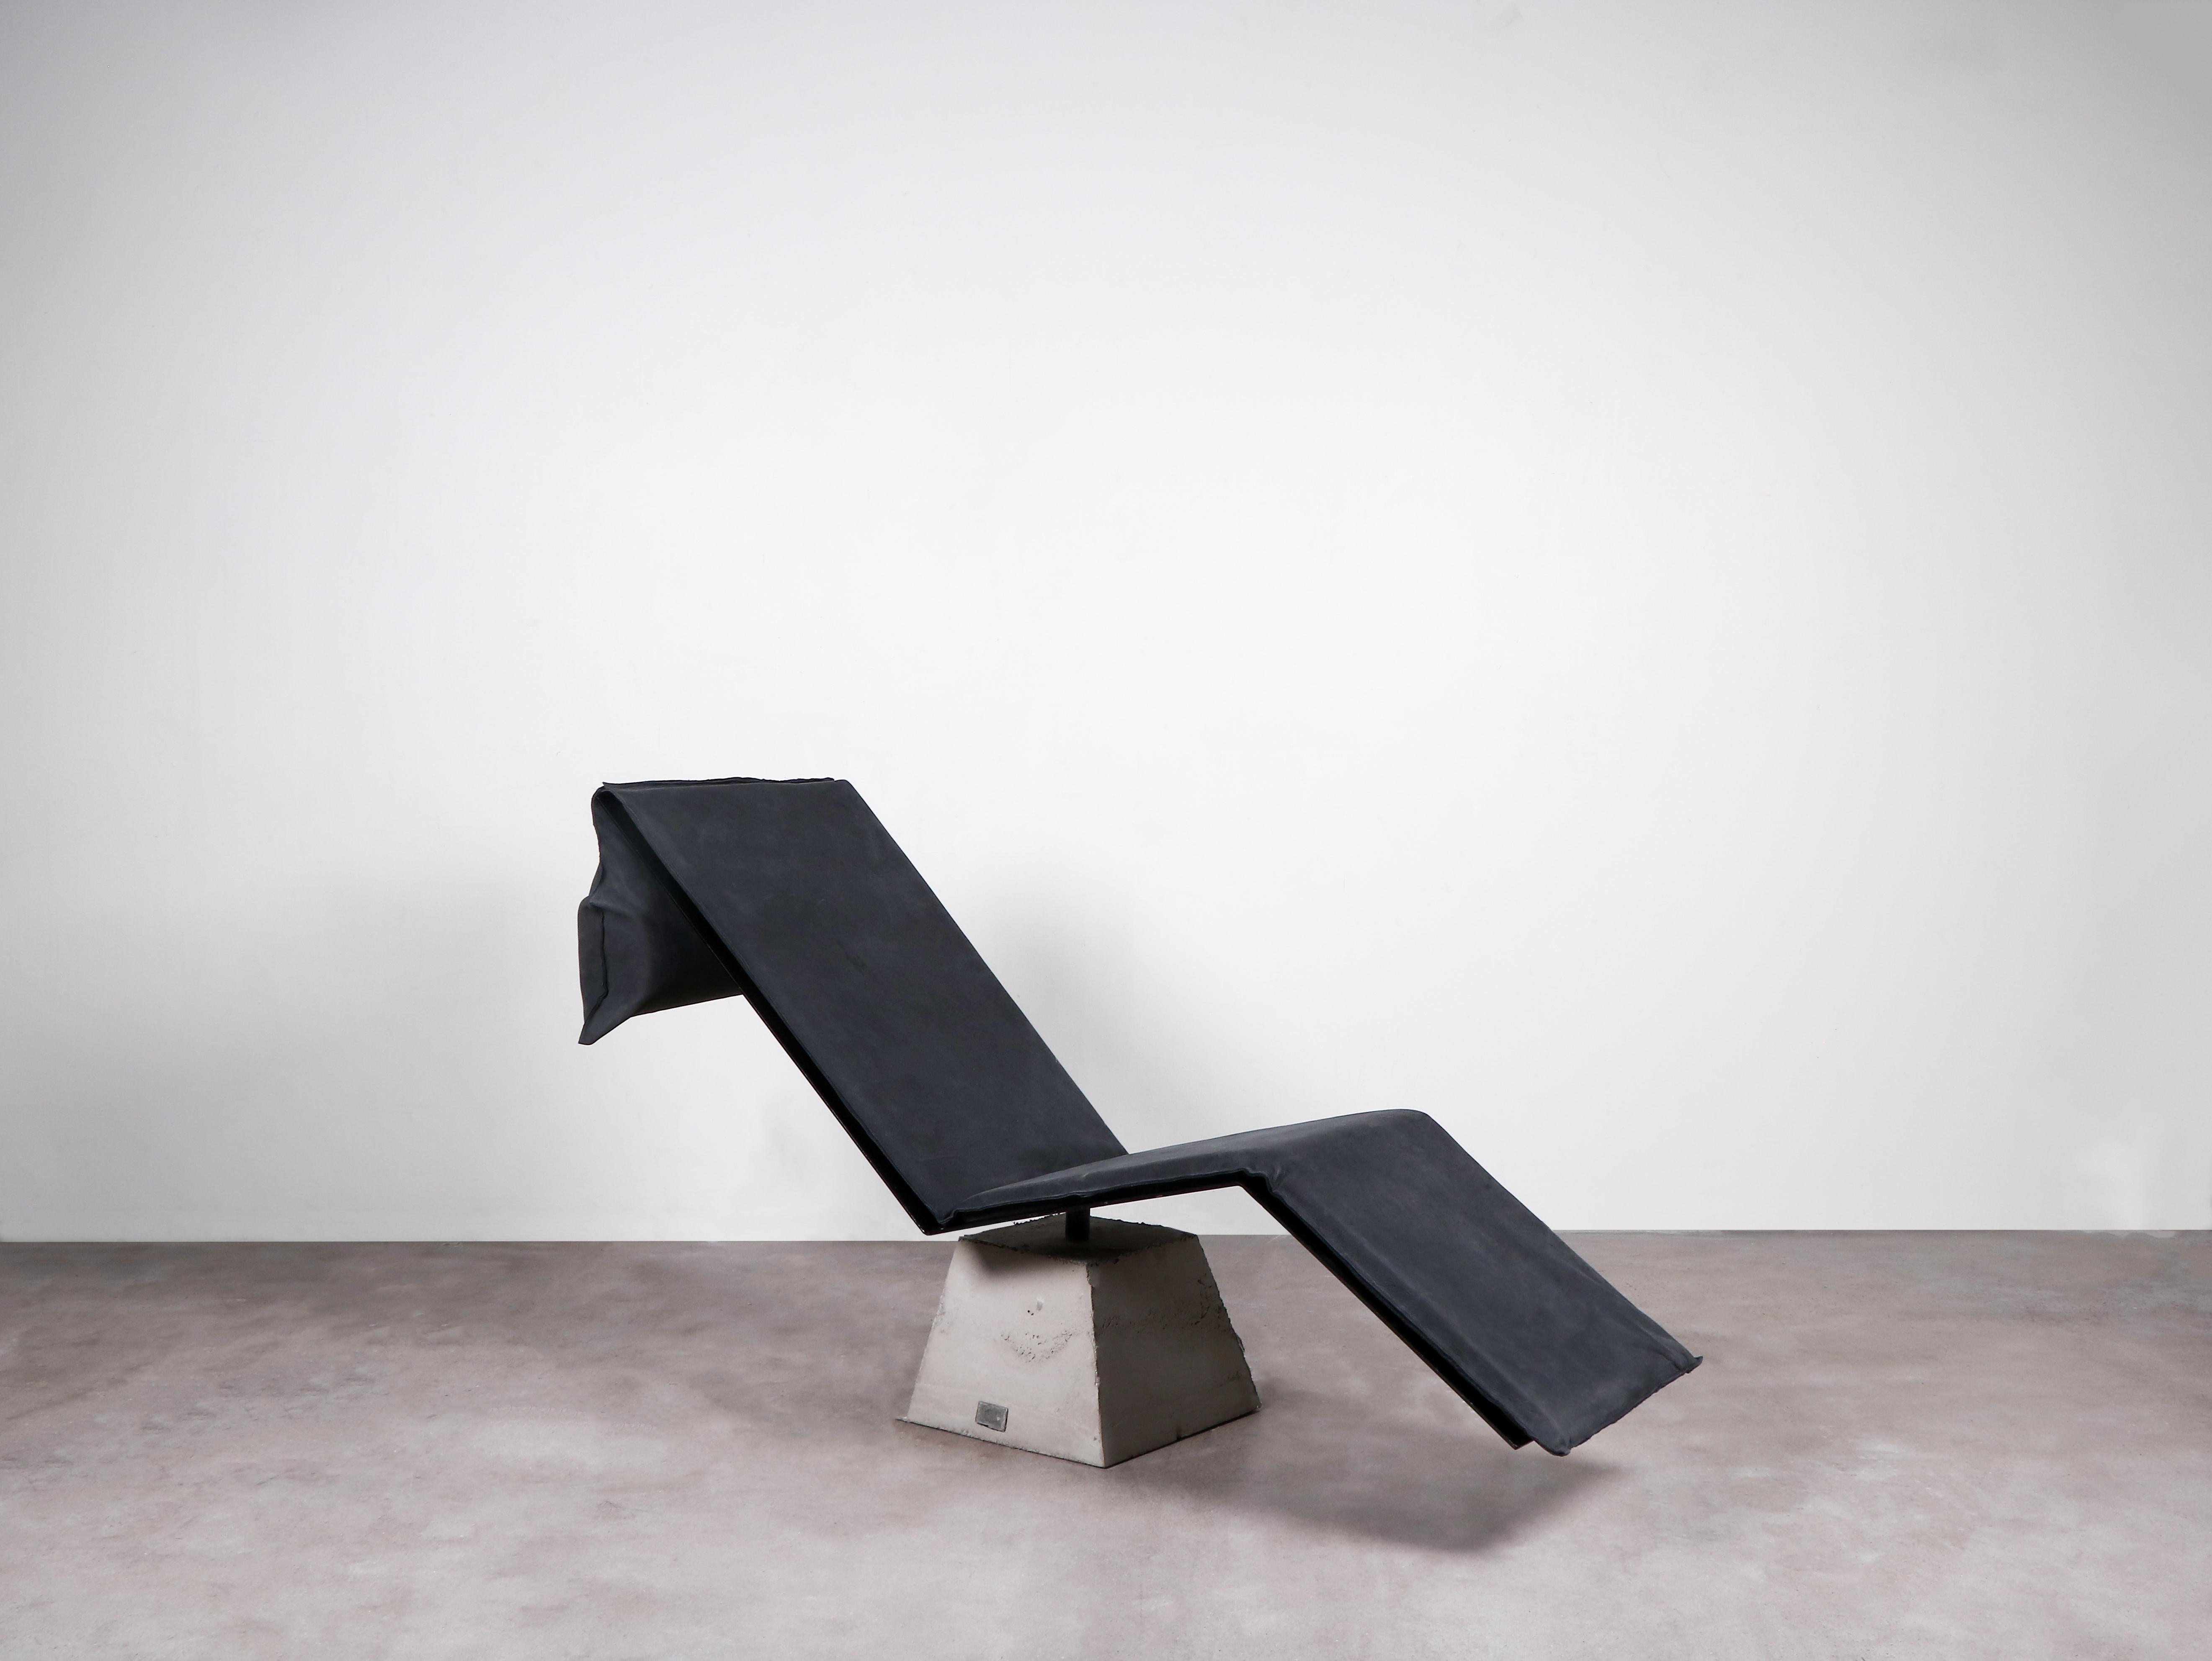 Swedish Contemporary Black Lounge Chair / Chaise Lounge, Flykt Chair by Lucas Morten